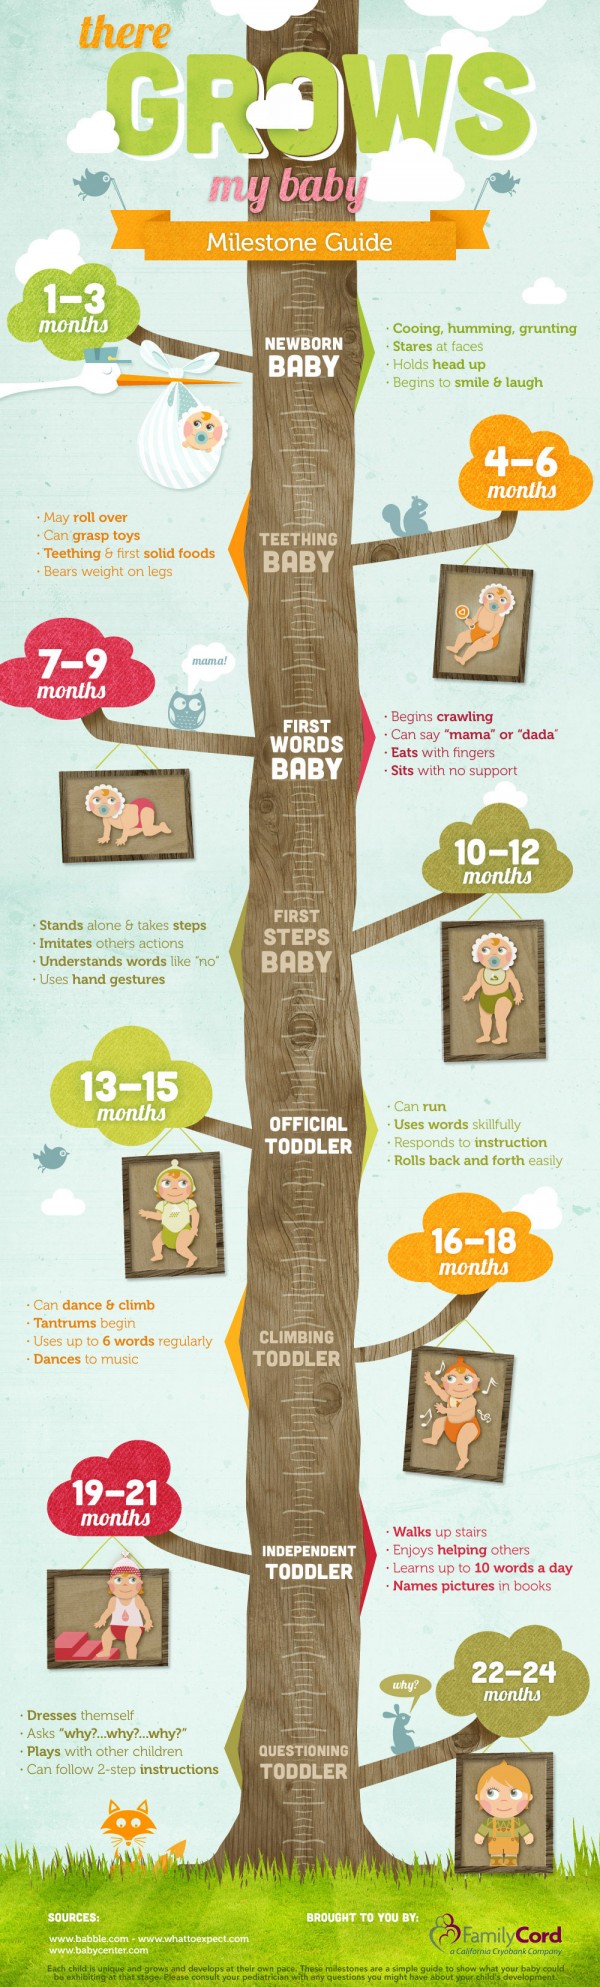 The Ultimate Guide to Your Baby’s Development